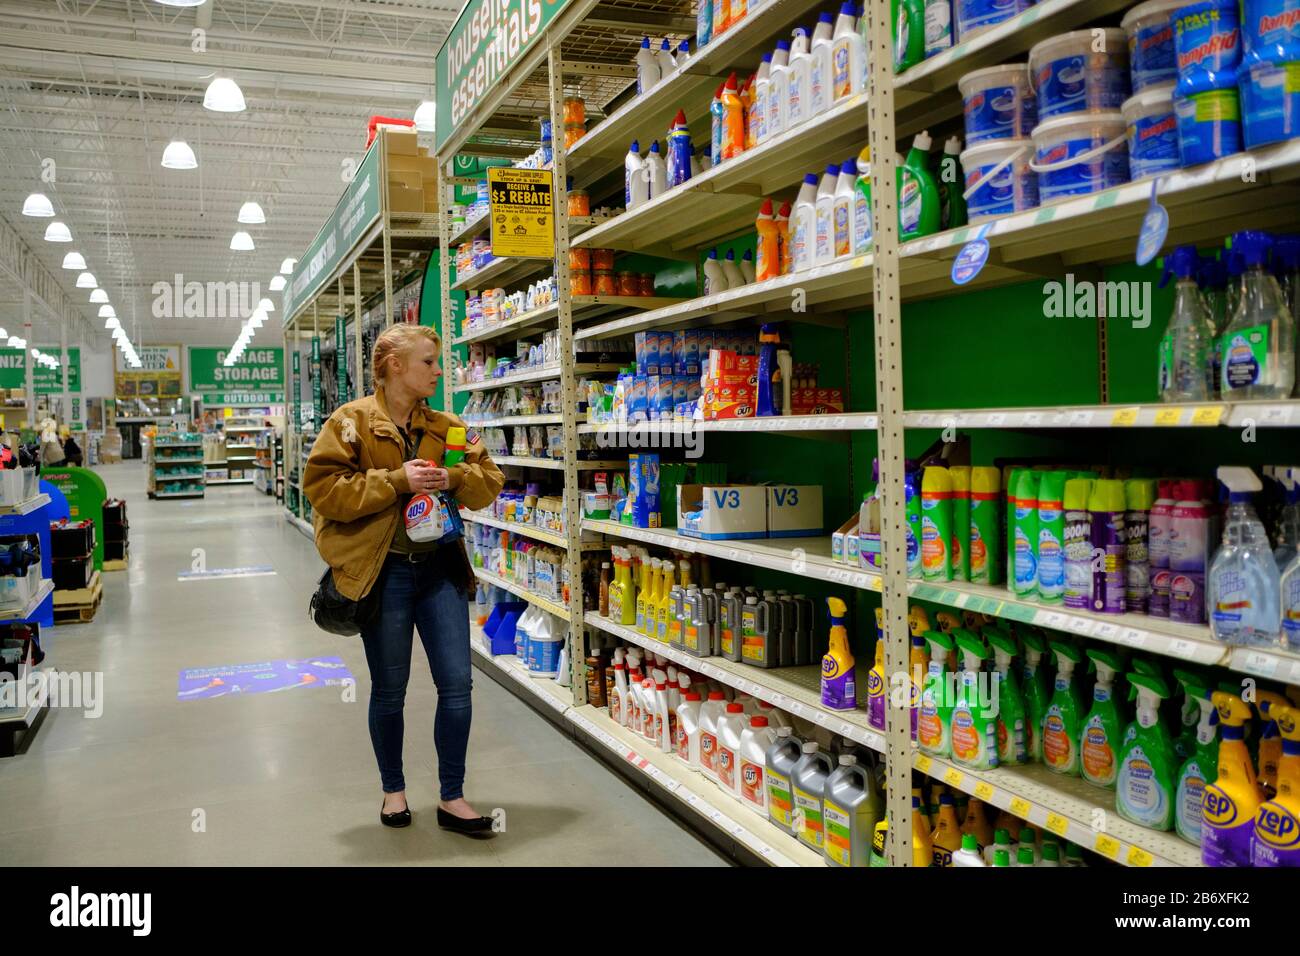 A woman shopping for disinfectants at Menards on the day World Health Organization declared Coronavirus to be a pandemic.Toilet paper, wipes, protective breathing masks, and other items are either sold out at local stores, or are in short supply. Stock Photo